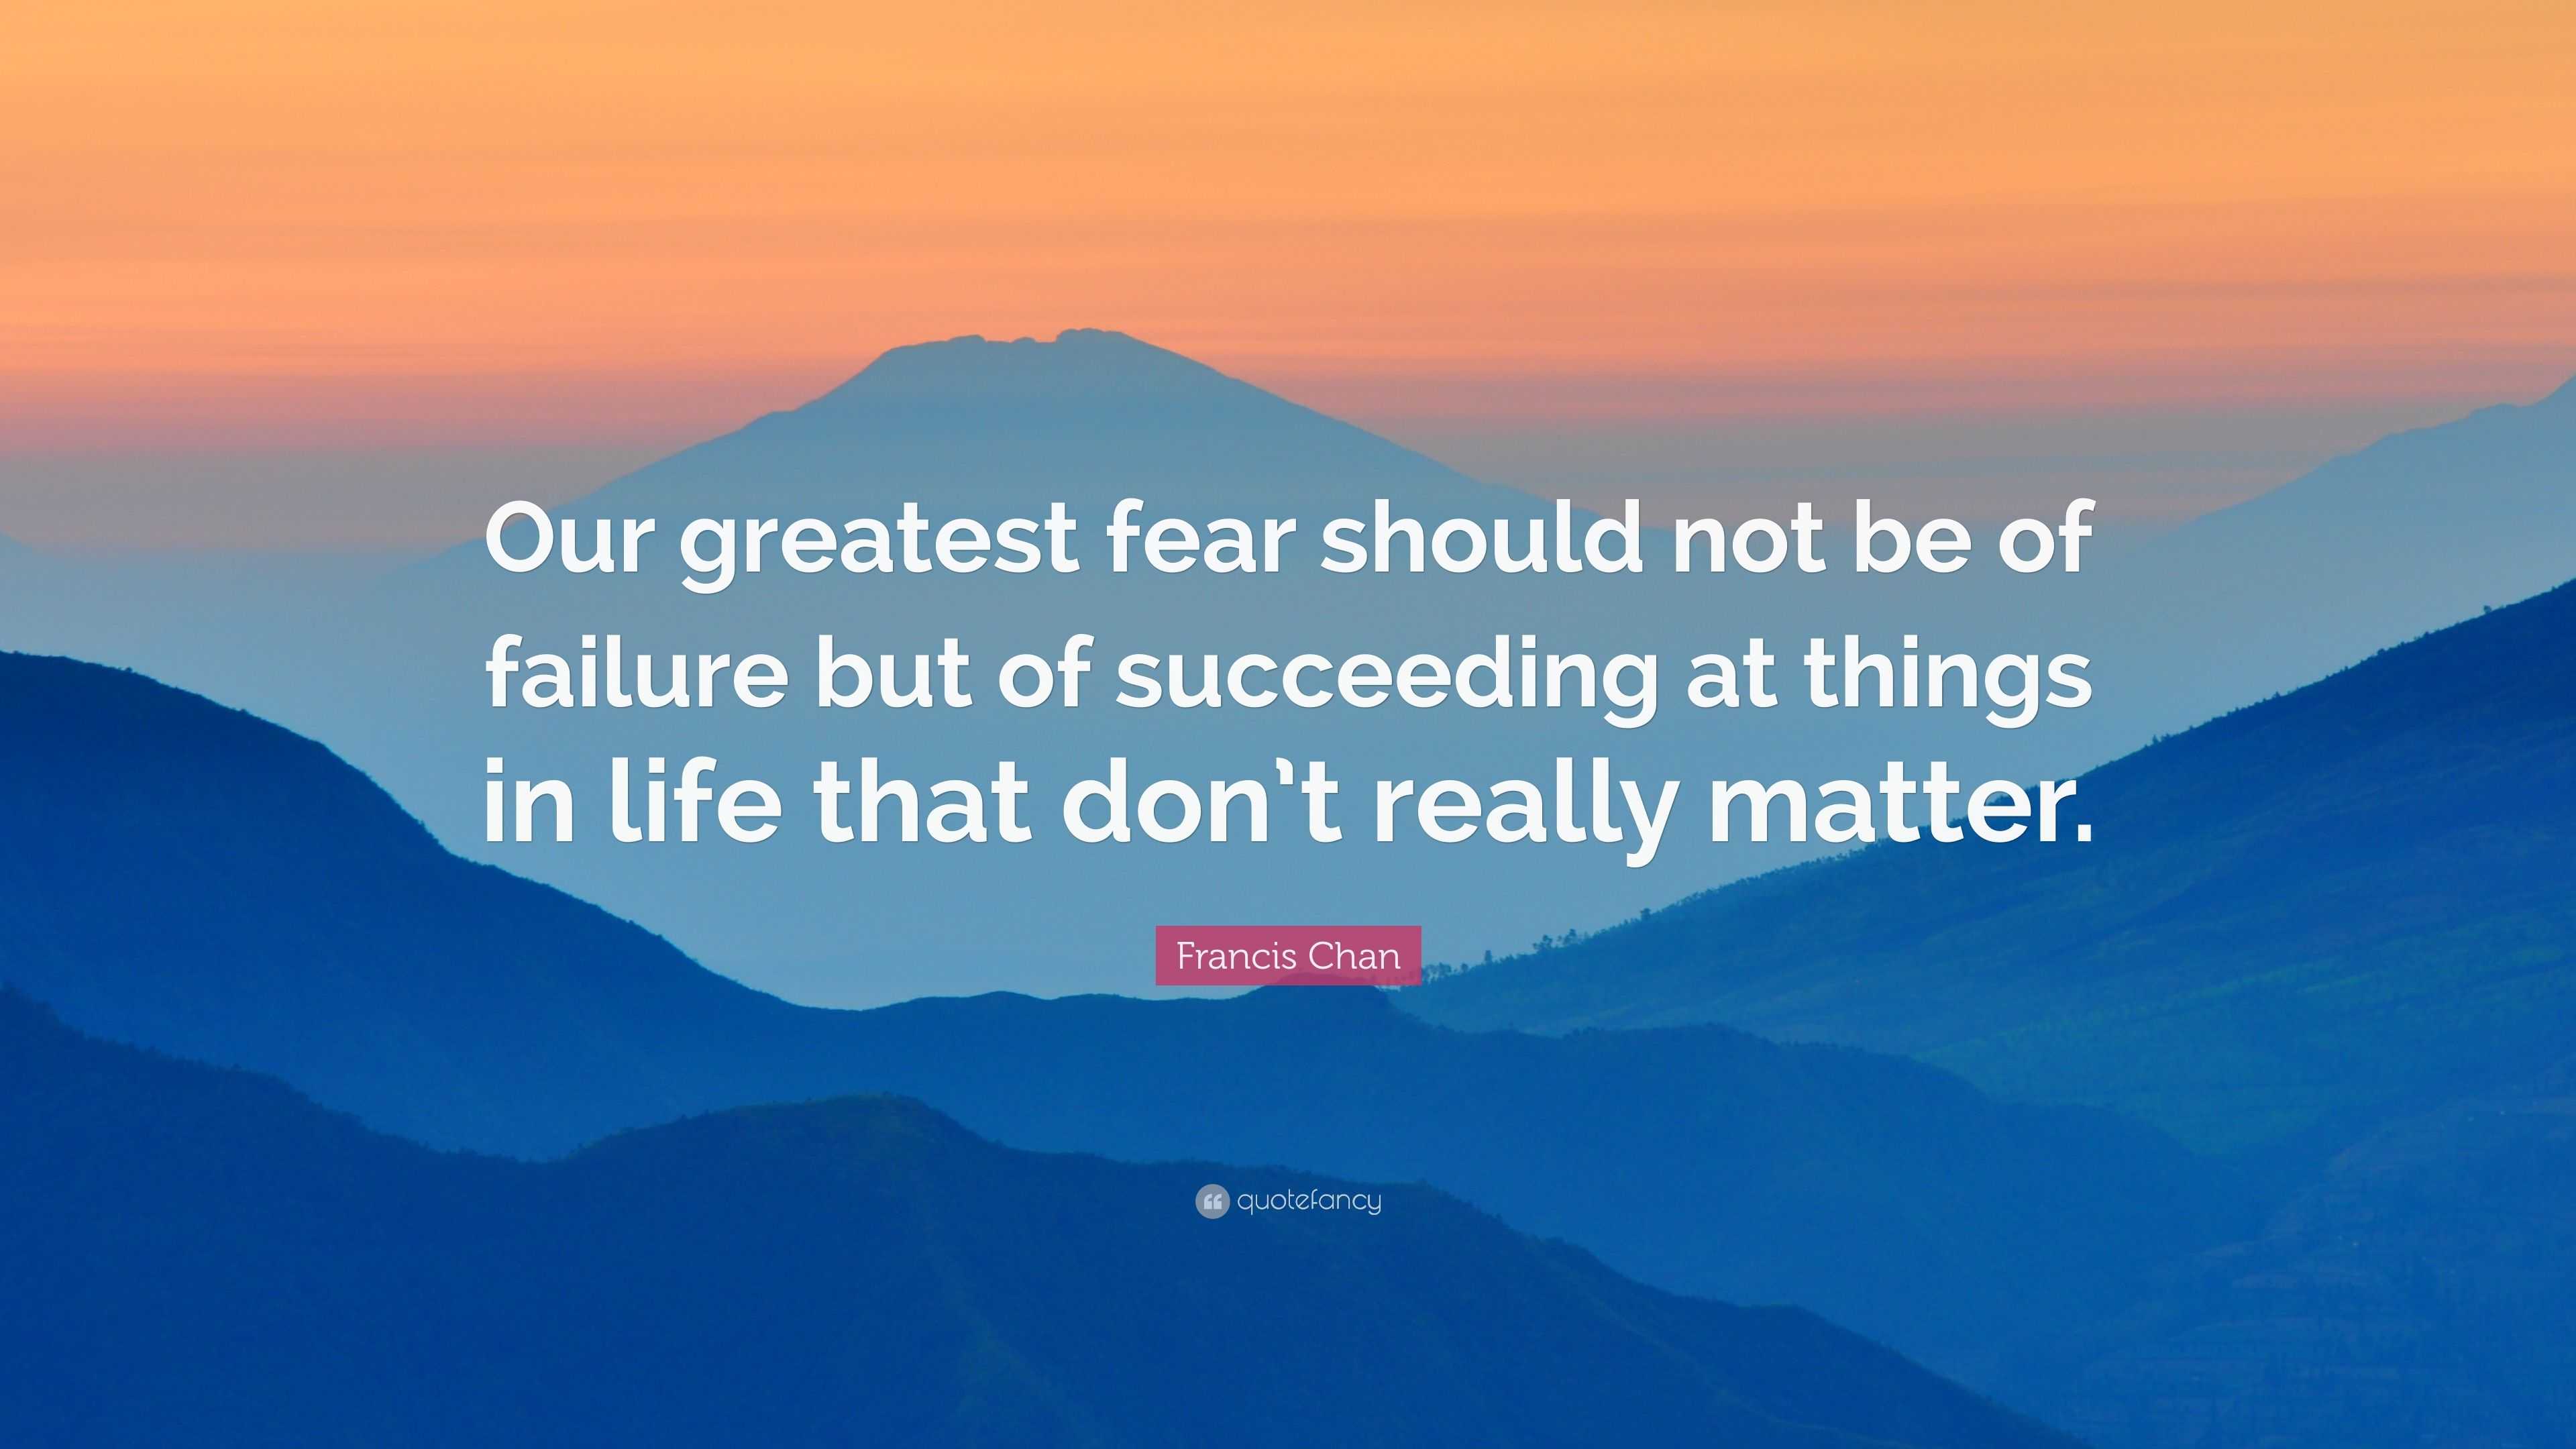 Francis Chan Quote: “Our greatest fear should not be of failure but of